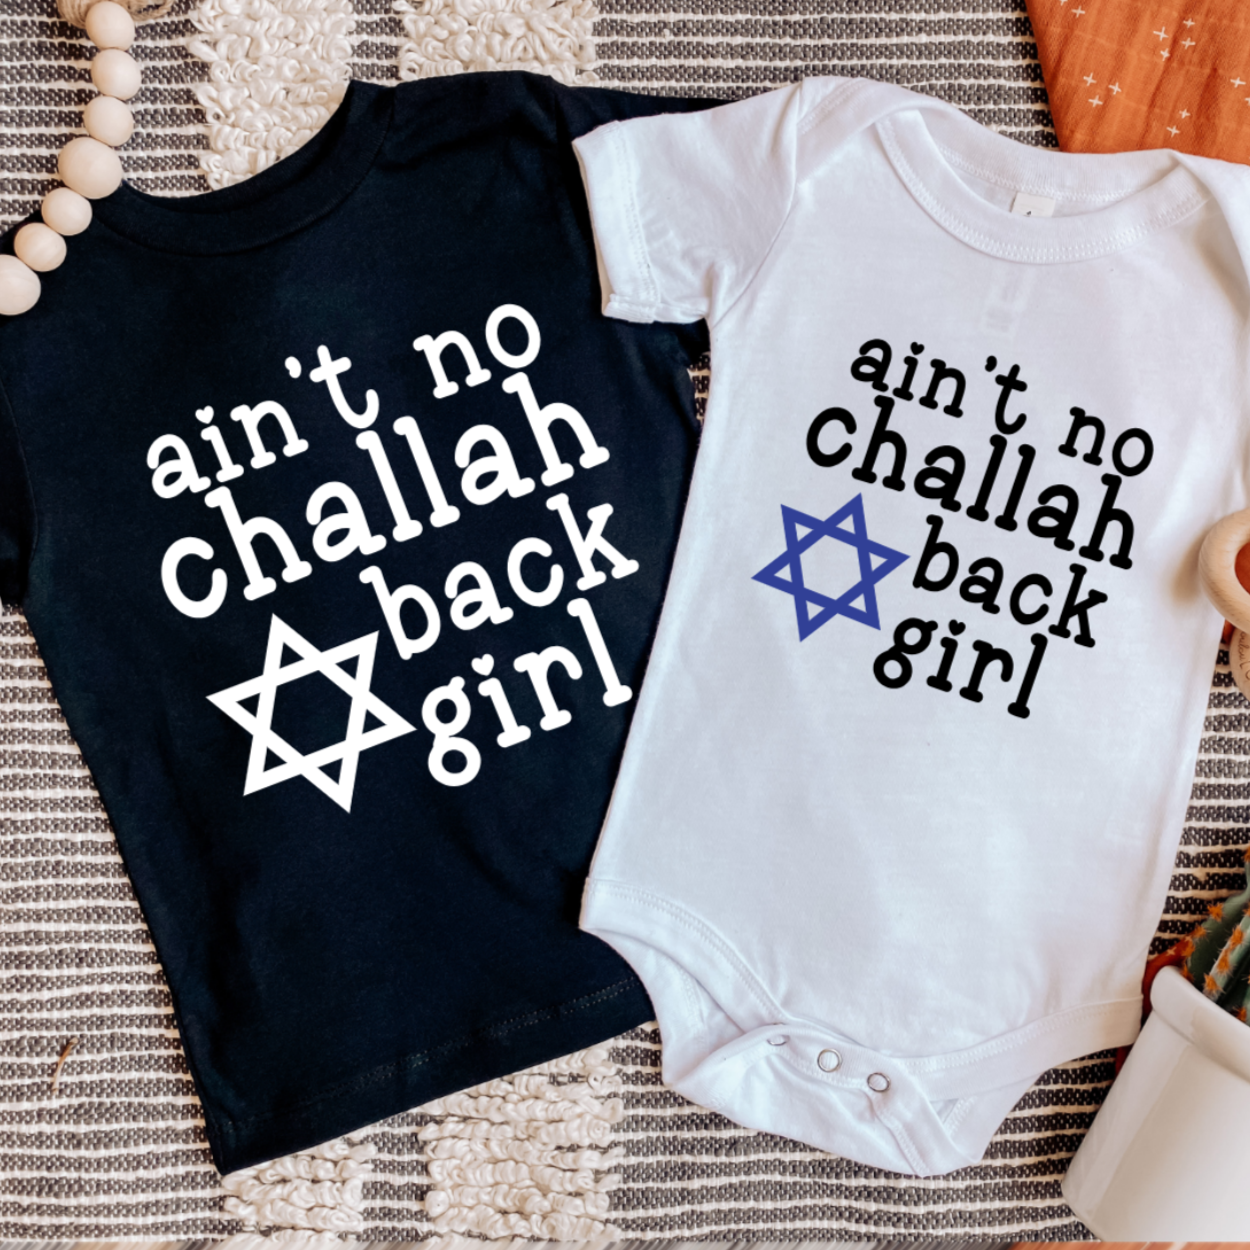 Challah at Your Boy/Ain't No Challah Back Girl Baby and Toddler Shirt Salt and Sparkle